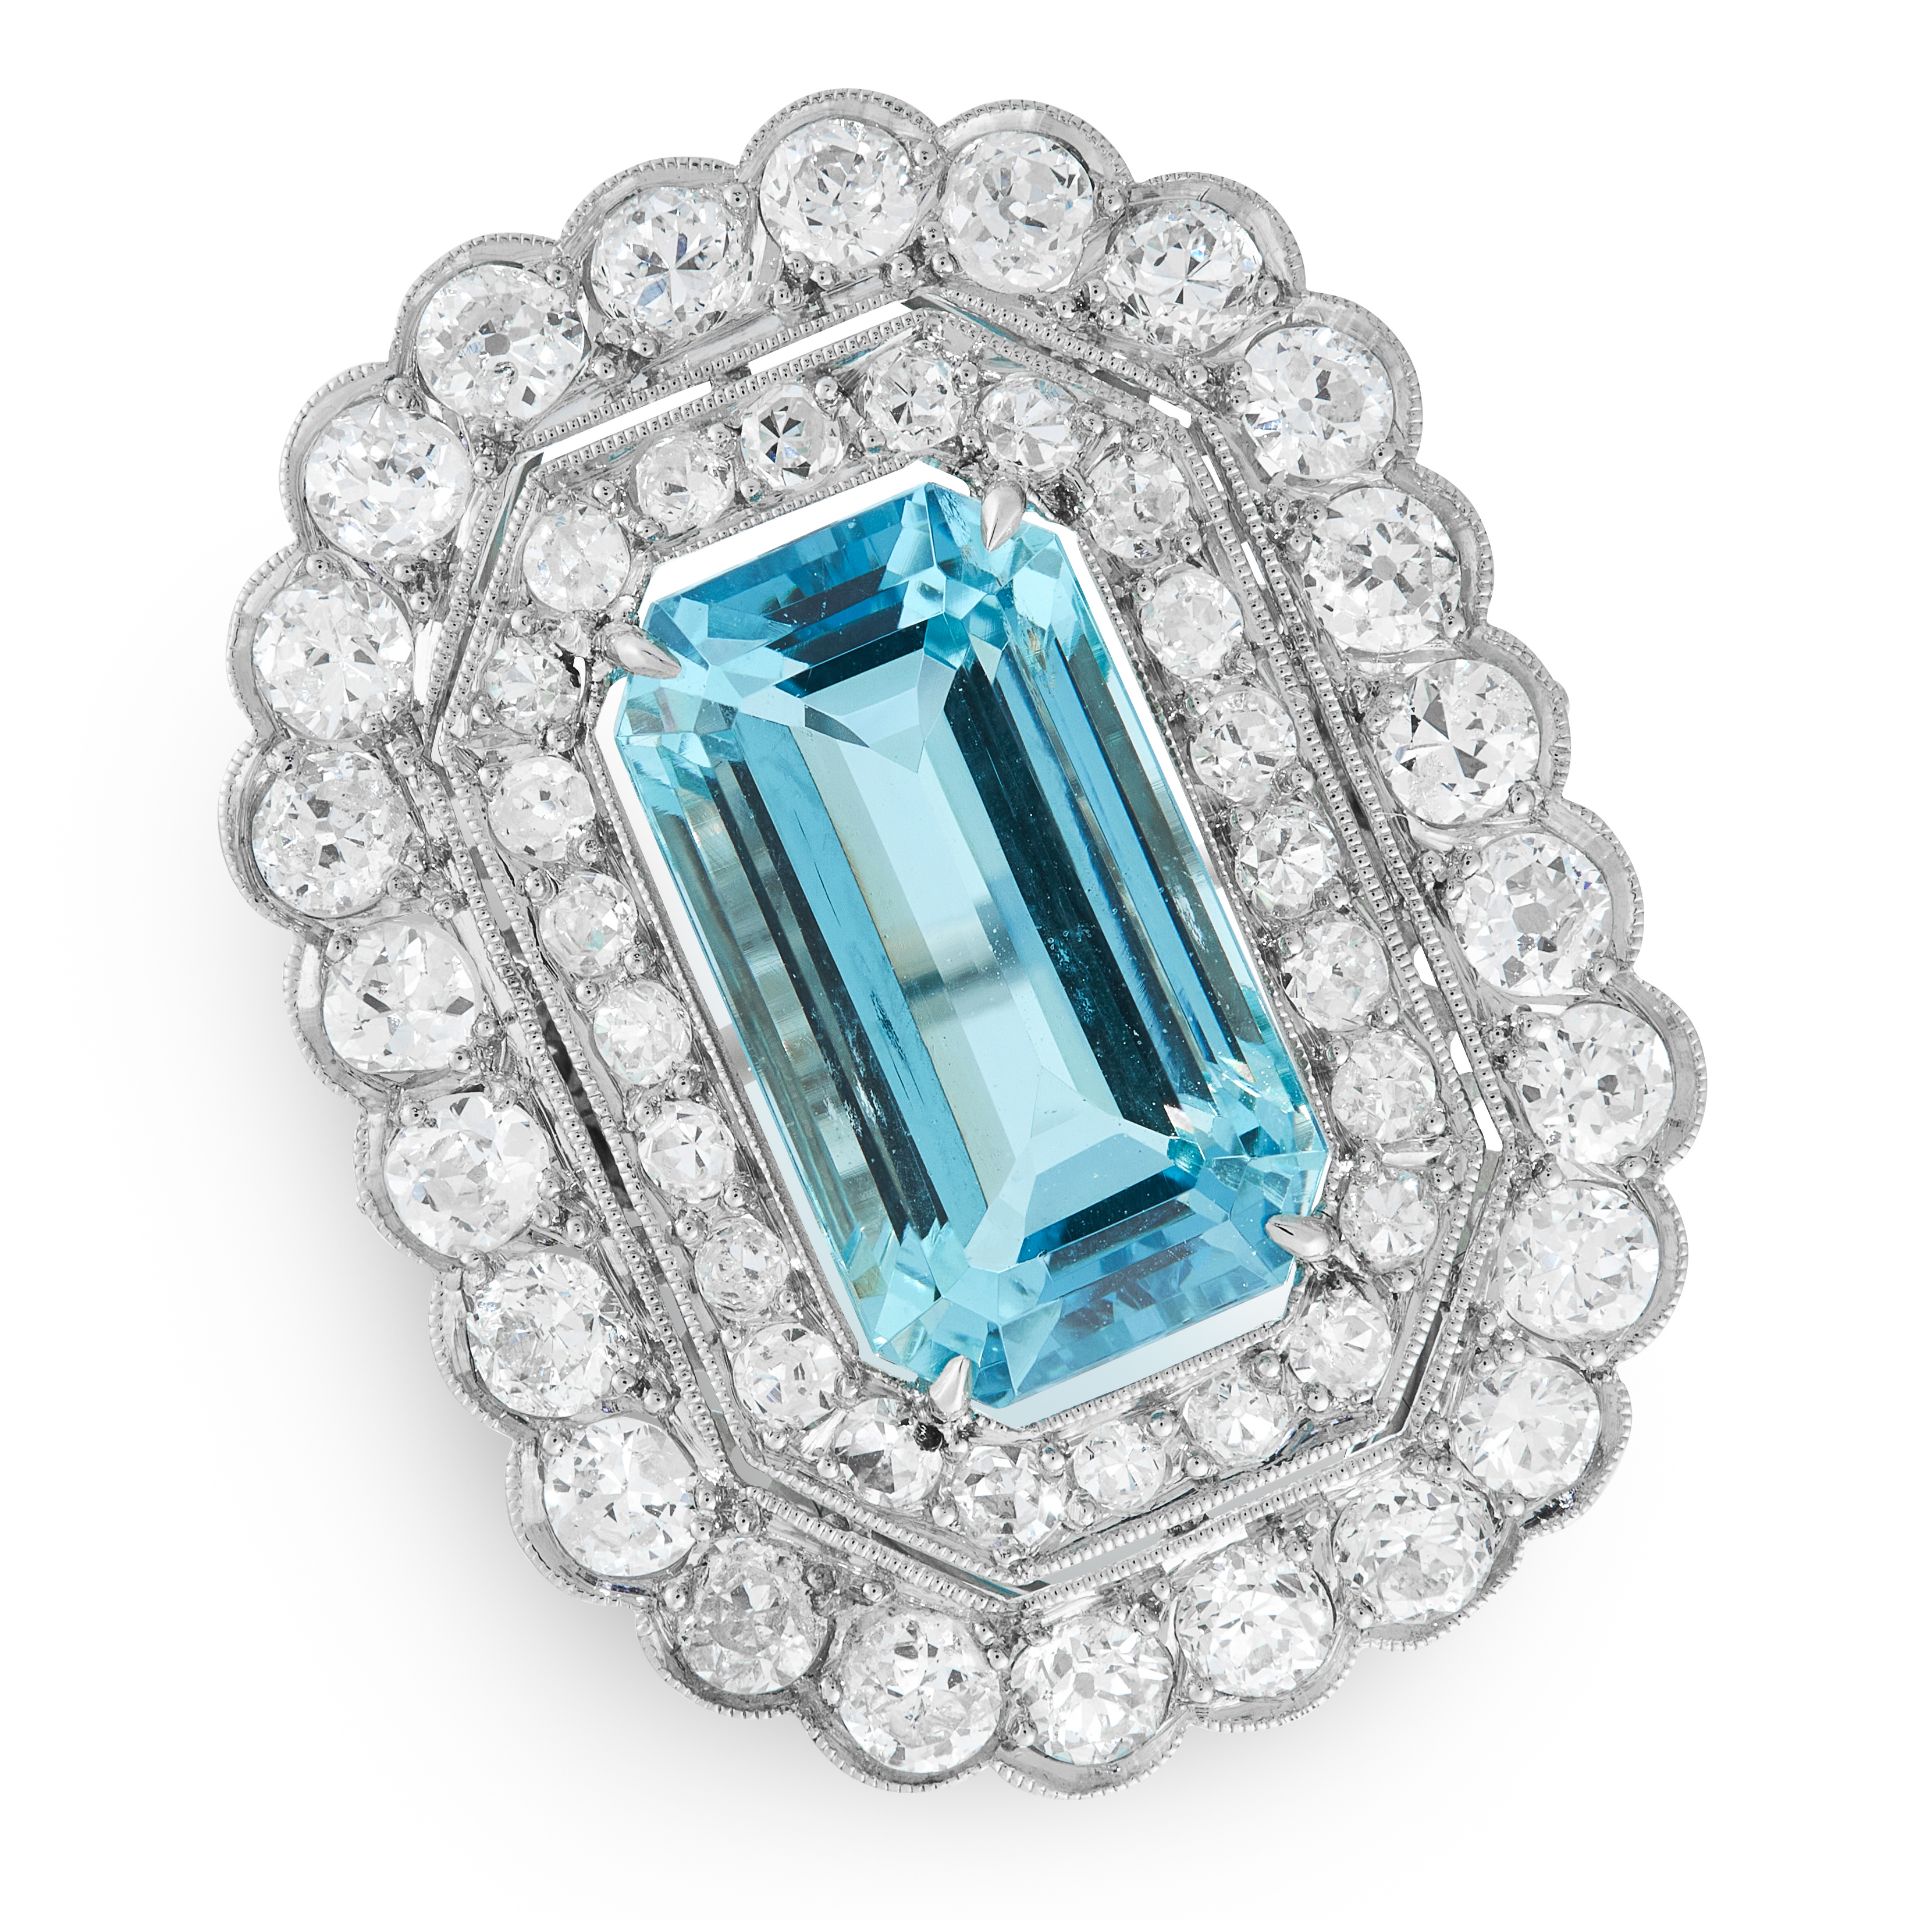 AN AQUAMARINE AND DIAMOND DRESS RING set with an emerald cut aquamarine of 8.26 carats within a